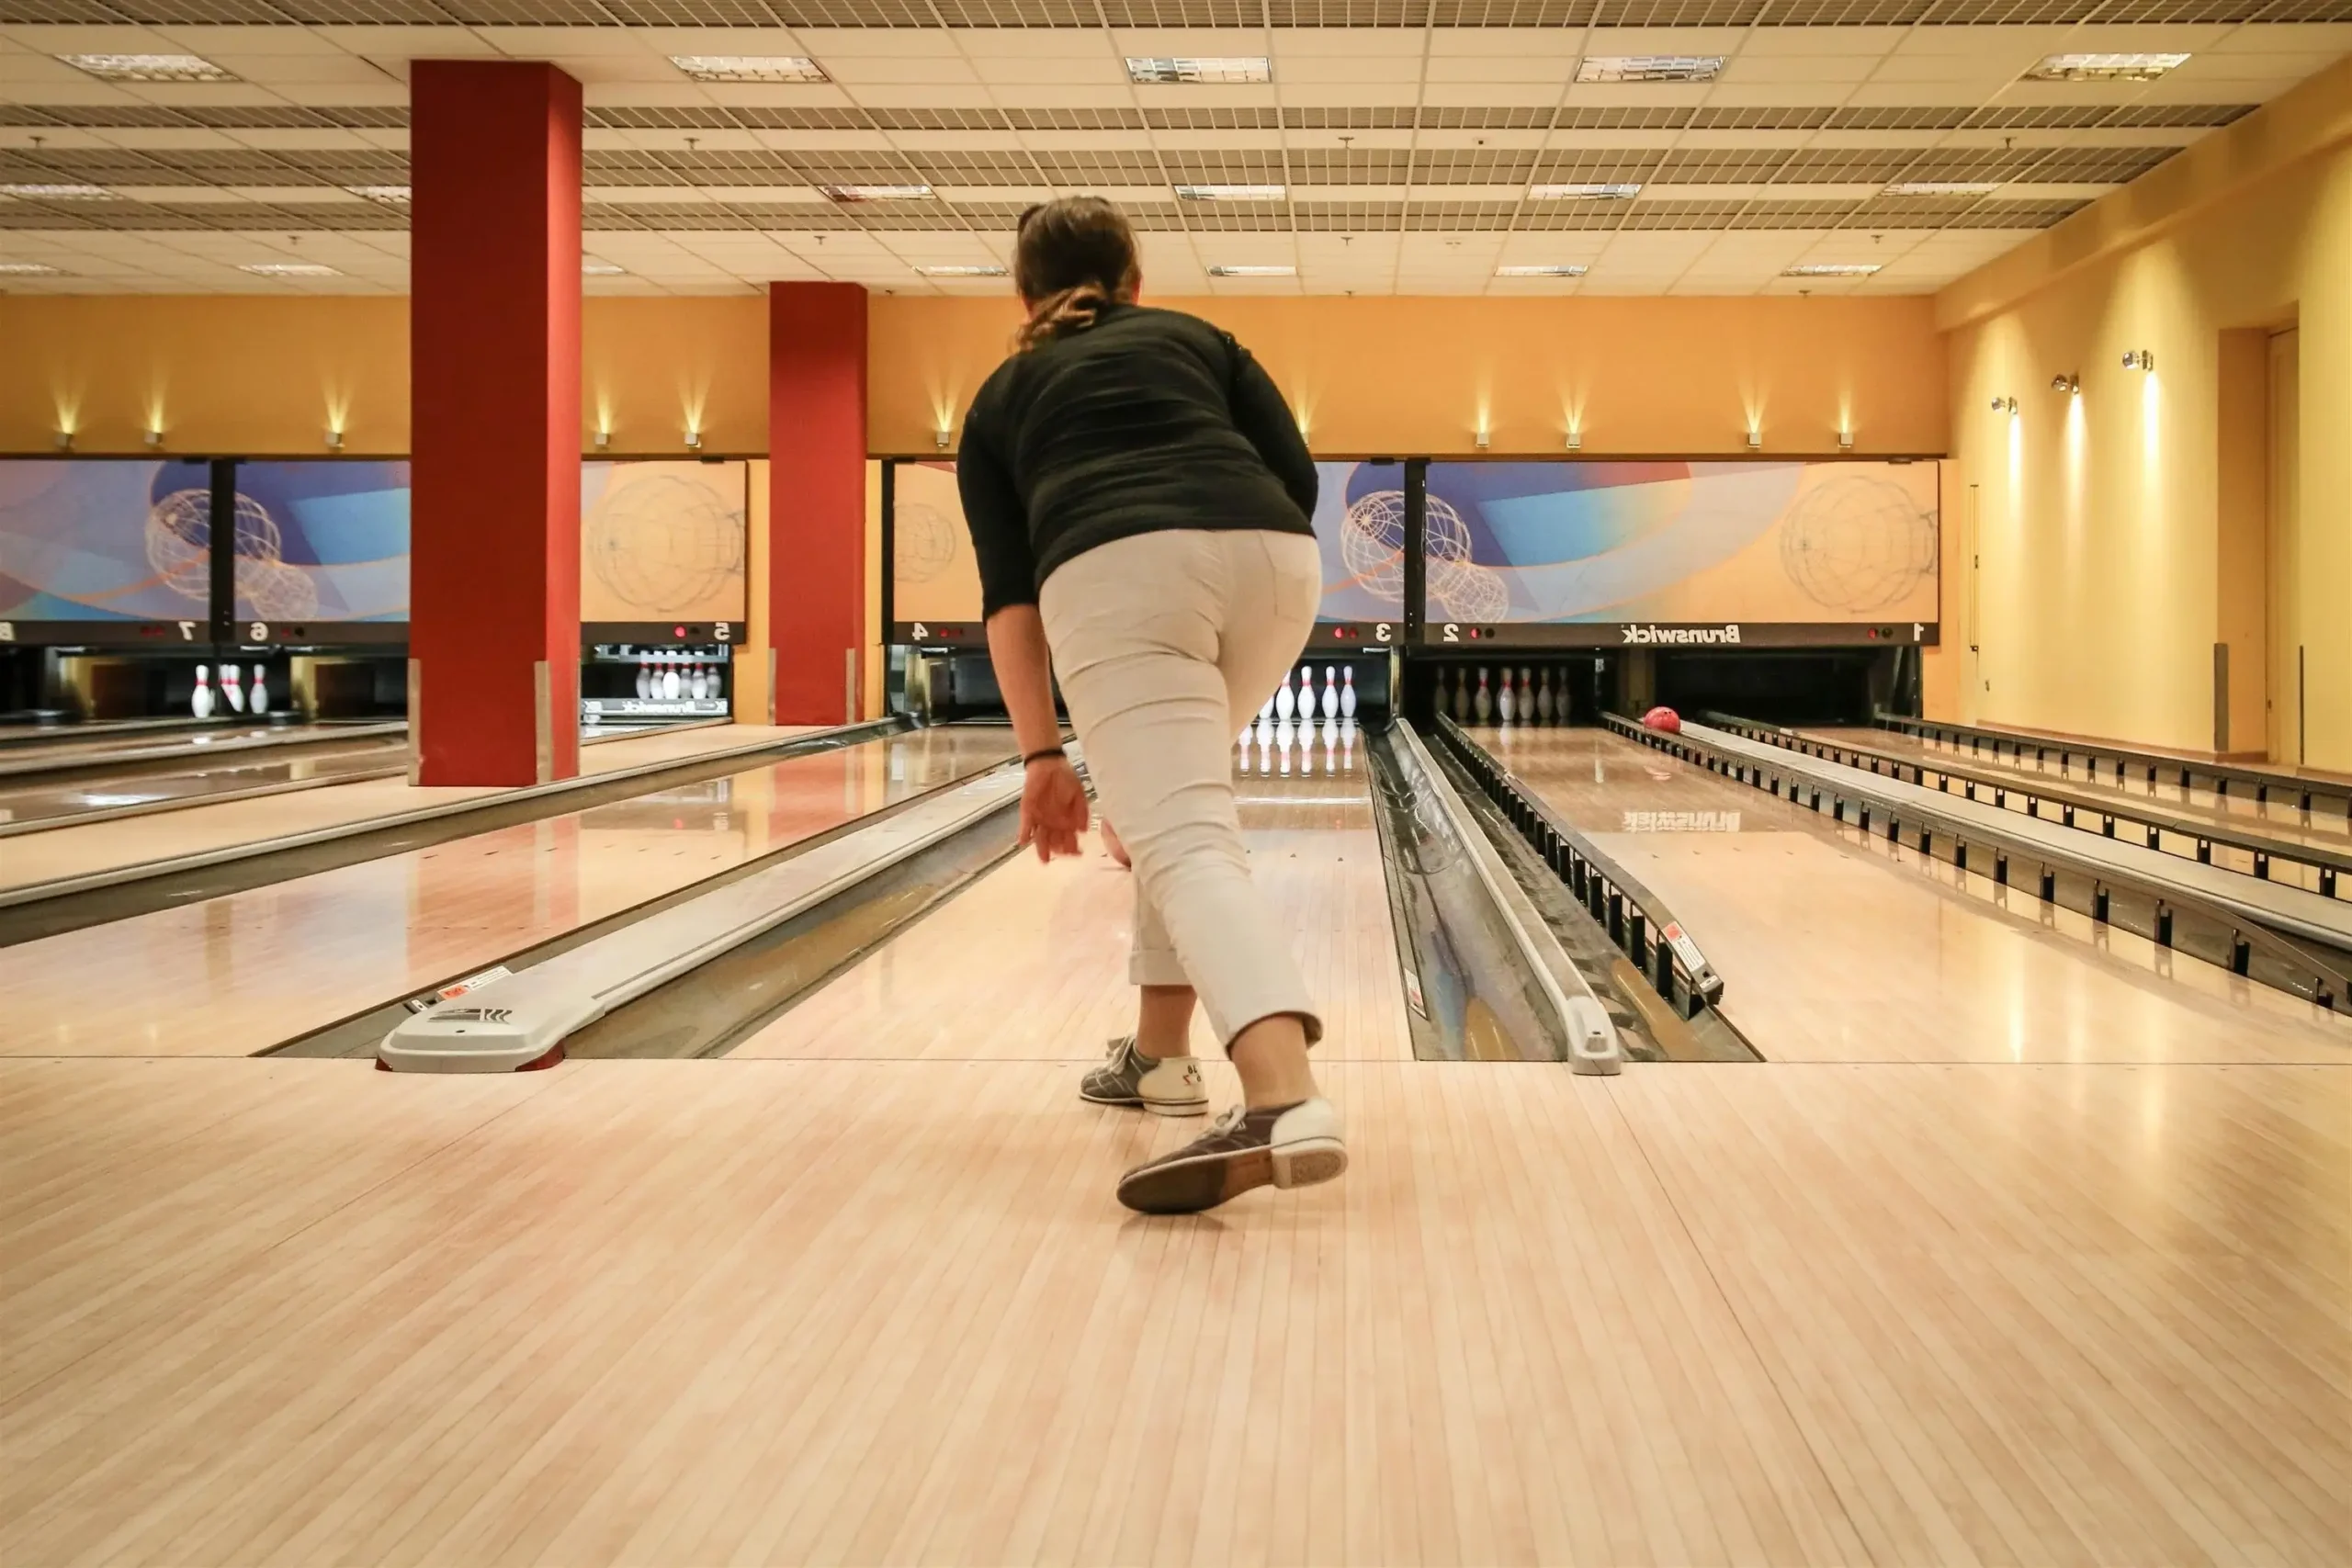 Bowling Etiquette Tips for Polite Play on the Lanes